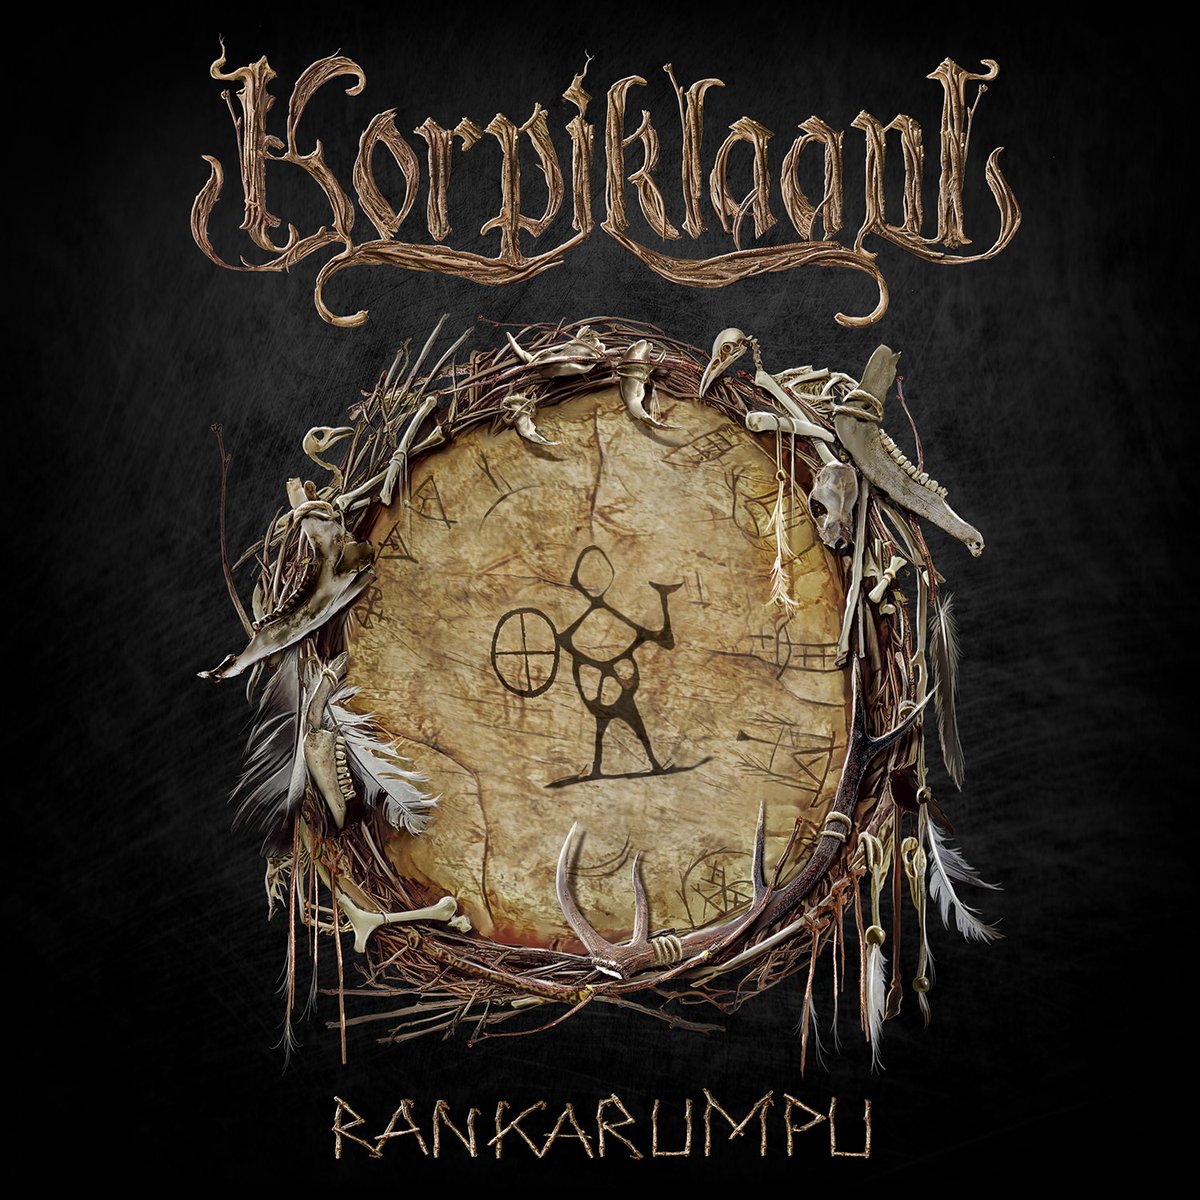 New @_korpiklaani album out now! We also have a new music video out today for the title track 'Rankarumpu'